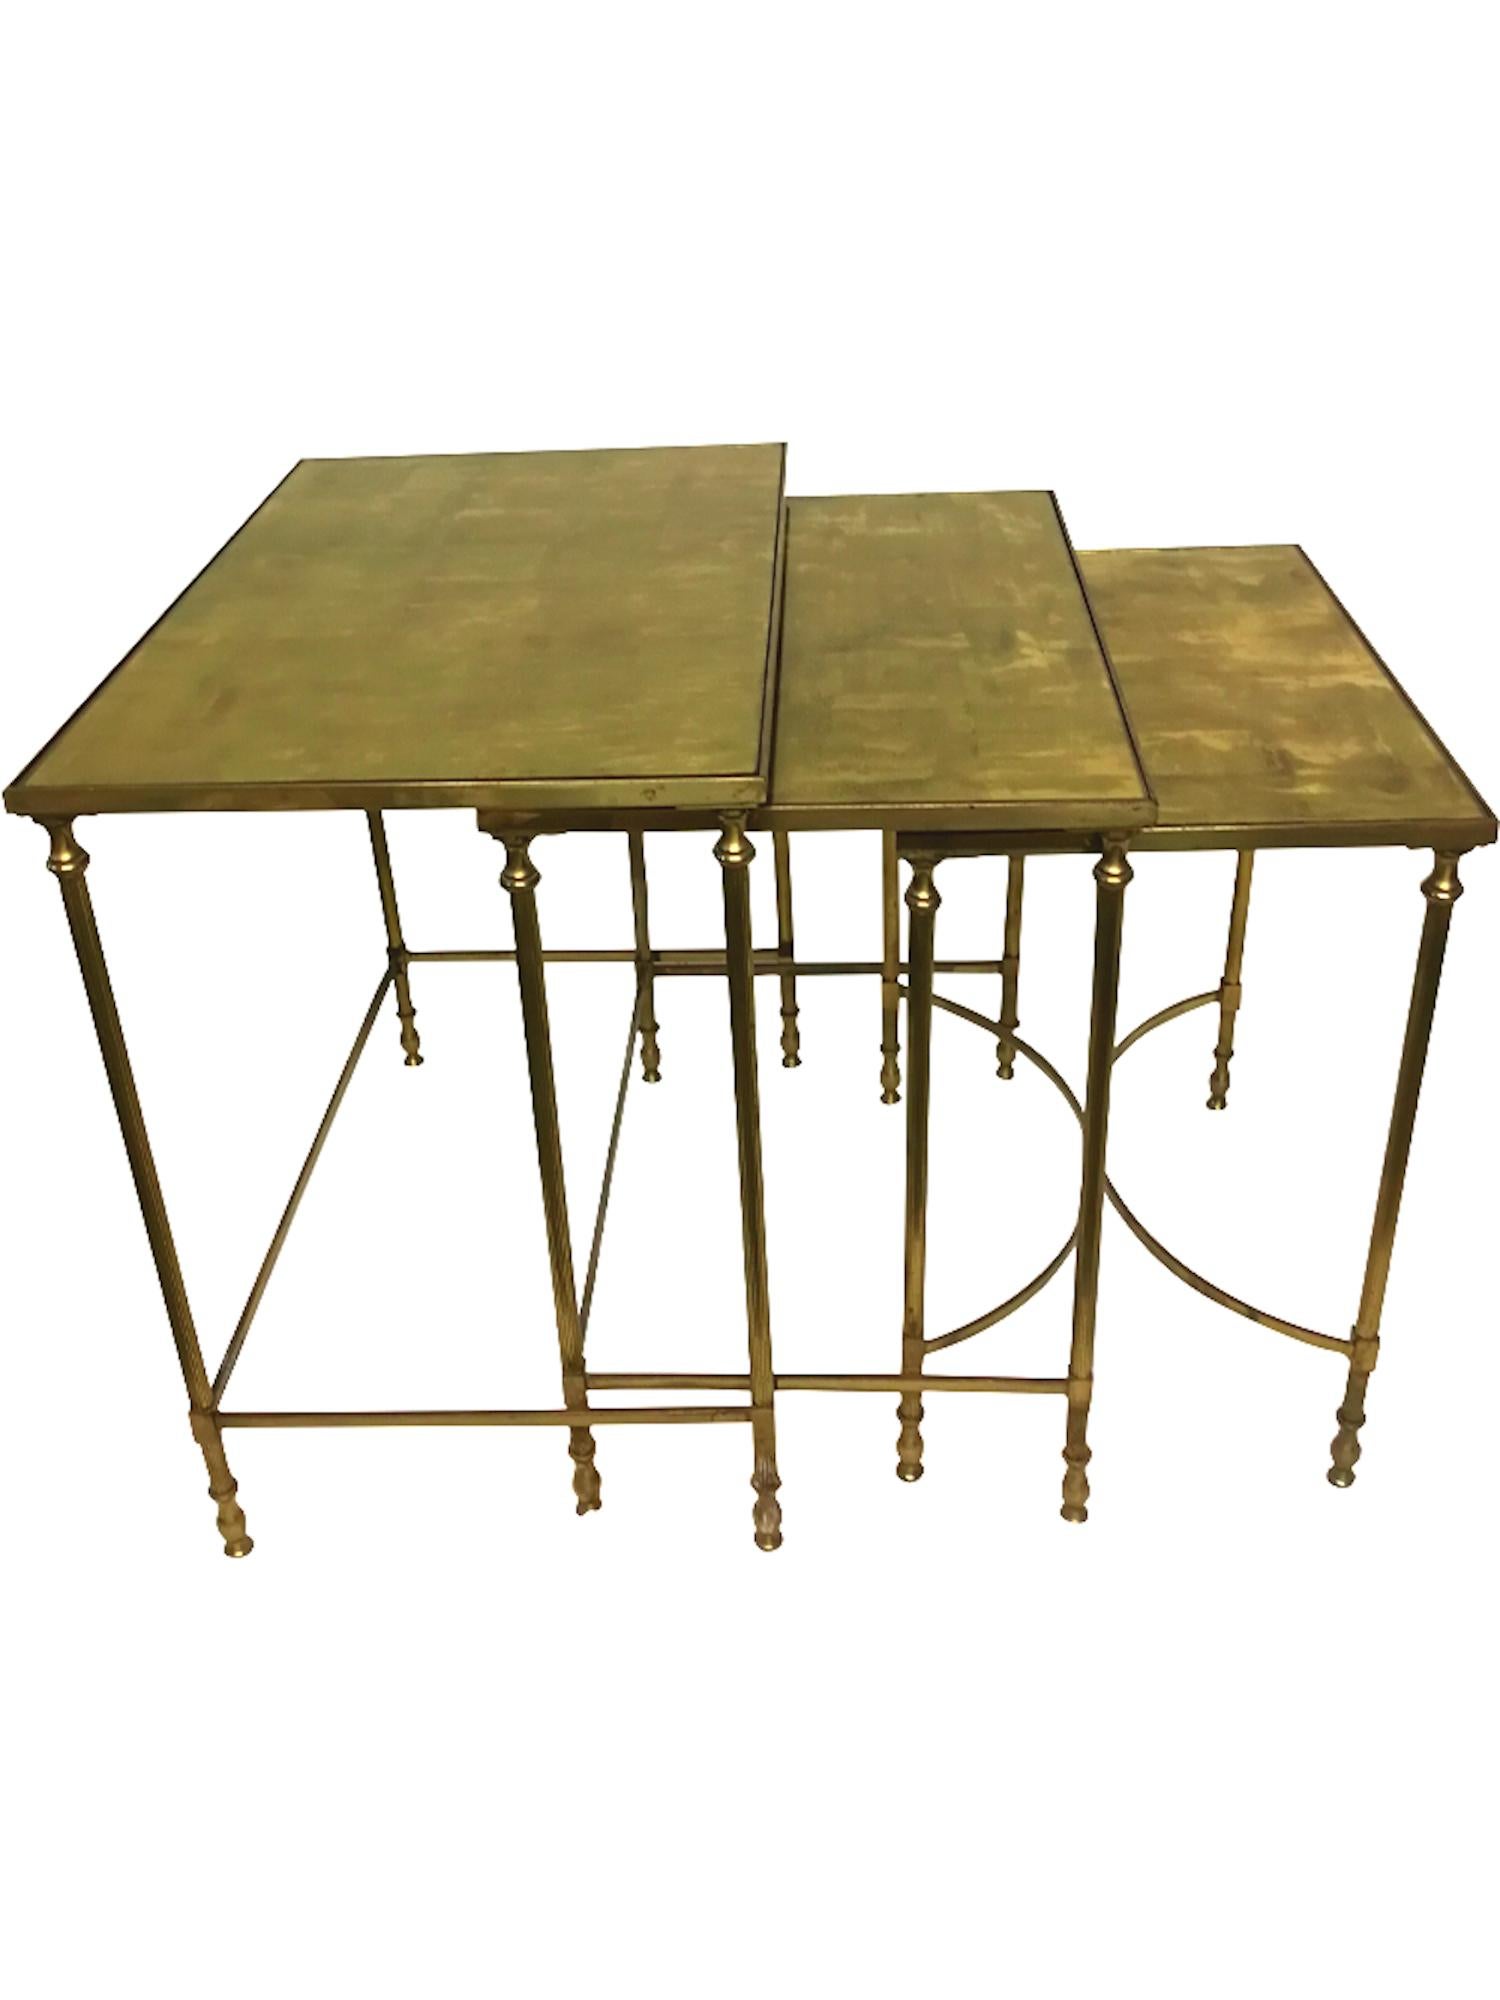 Vintage set of 3 neo classical style nested tables in gilt bronze with fluted legs and arched stretchers on the smallest table and removable glass tops with gold leaf fixed under glass, in the style of the French design houses like Maison Jansen and